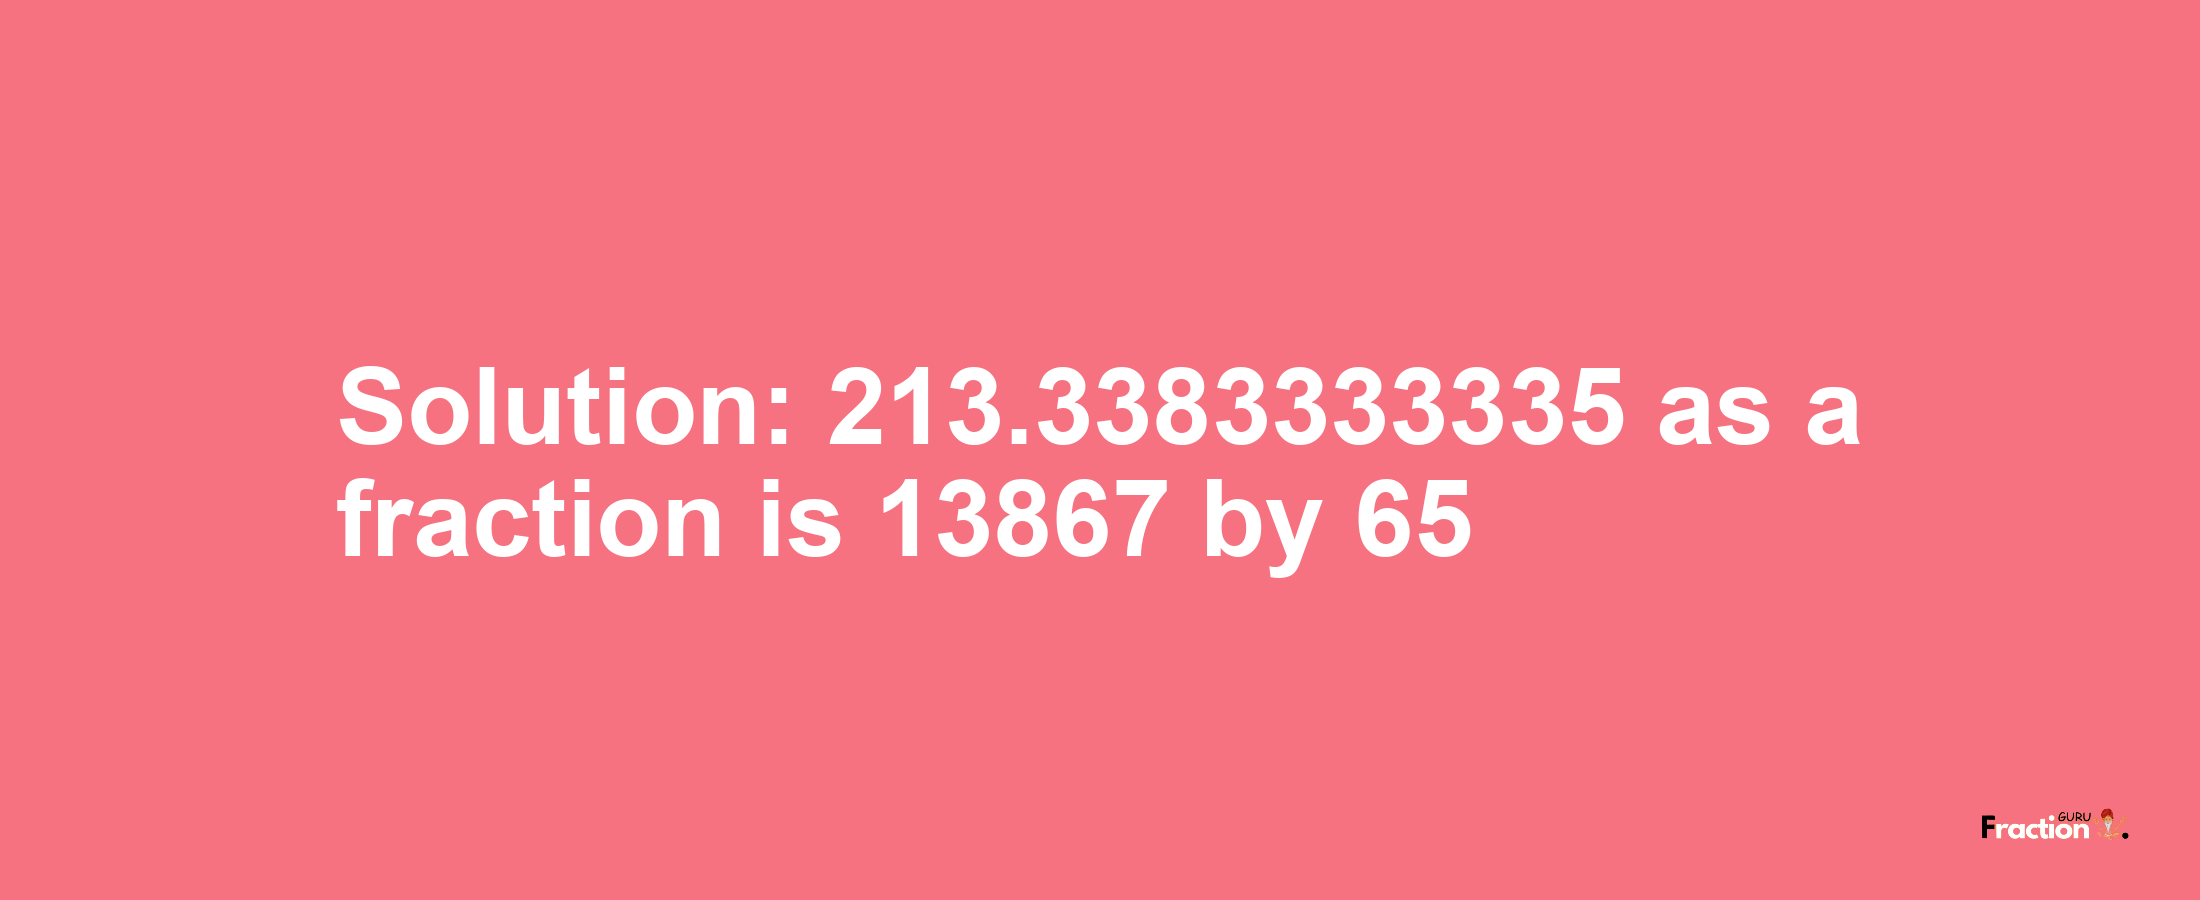 Solution:213.3383333335 as a fraction is 13867/65